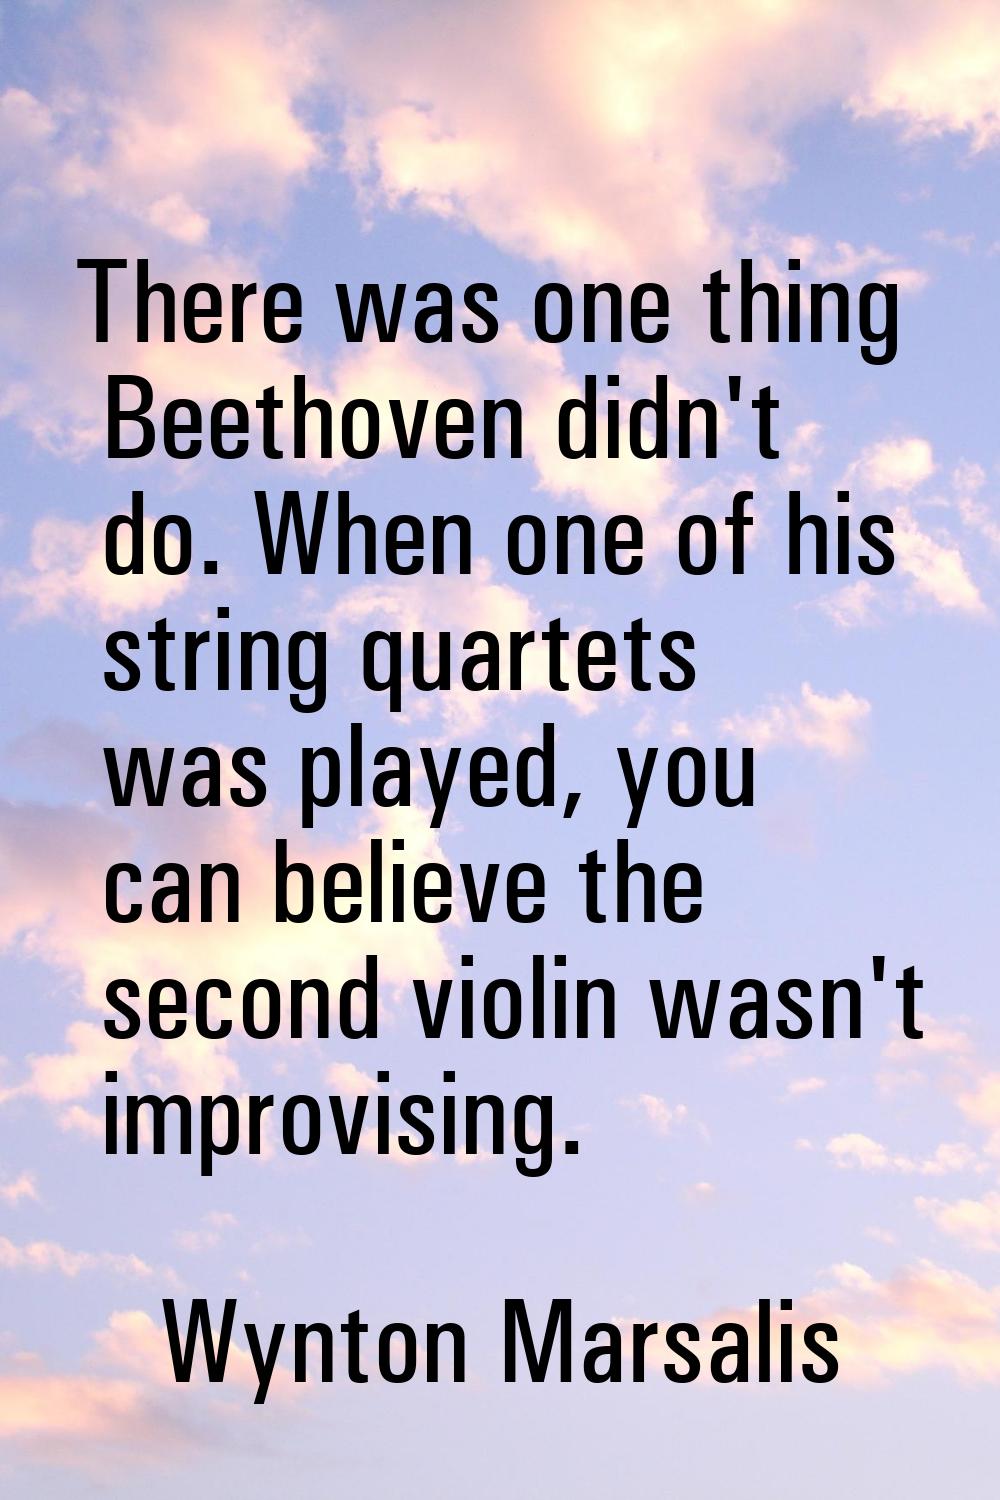 There was one thing Beethoven didn't do. When one of his string quartets was played, you can believ